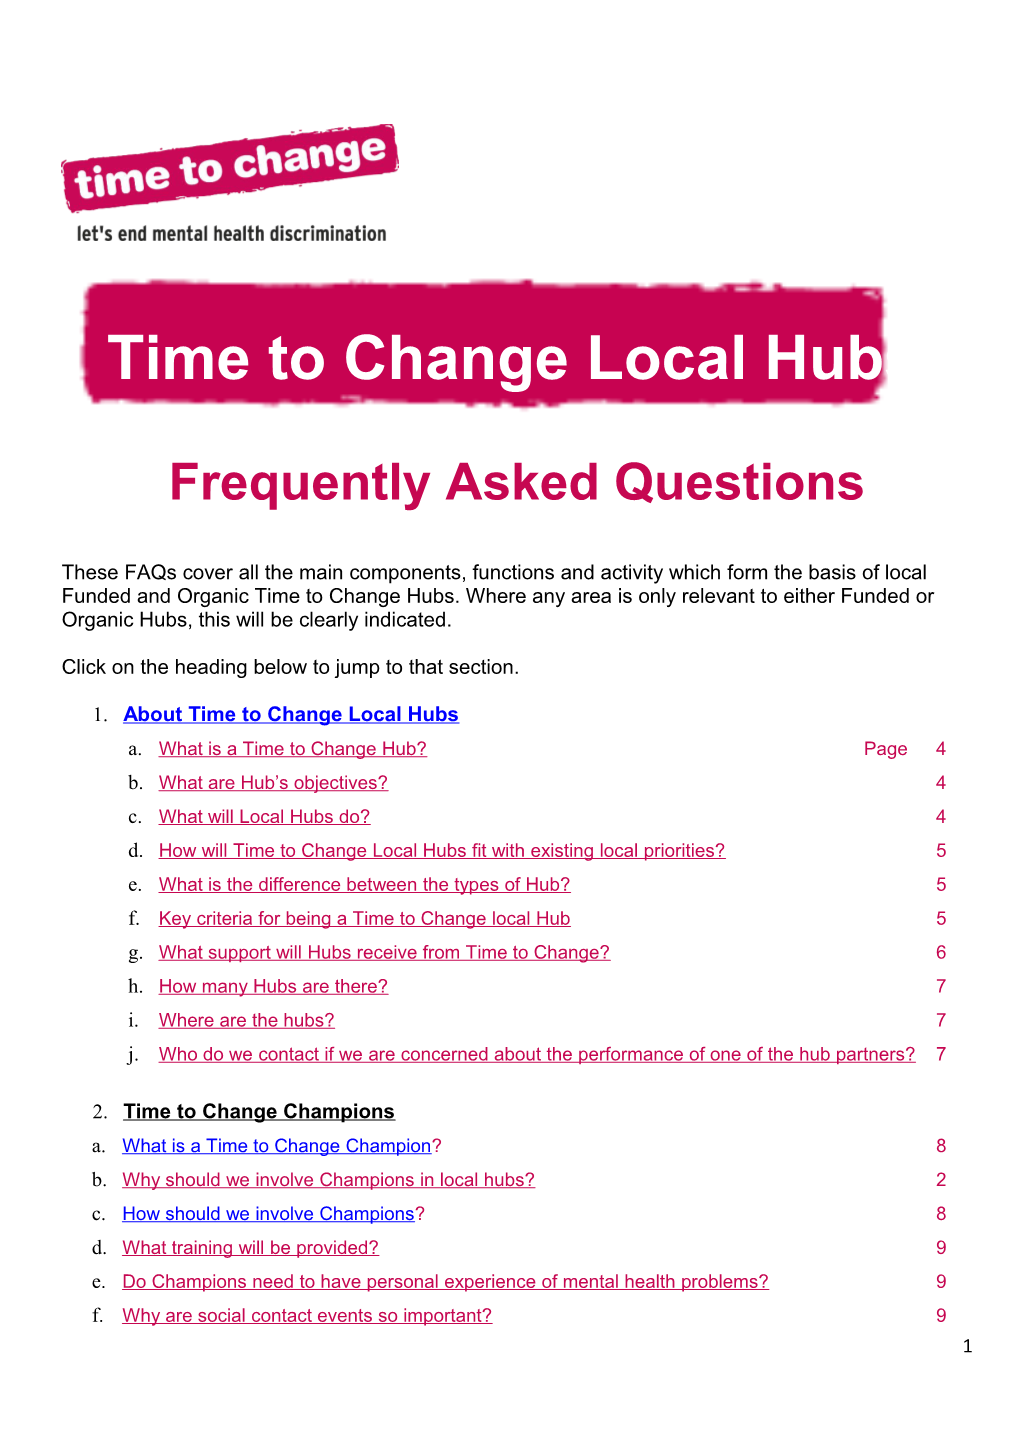 Time to Change Local Hubs